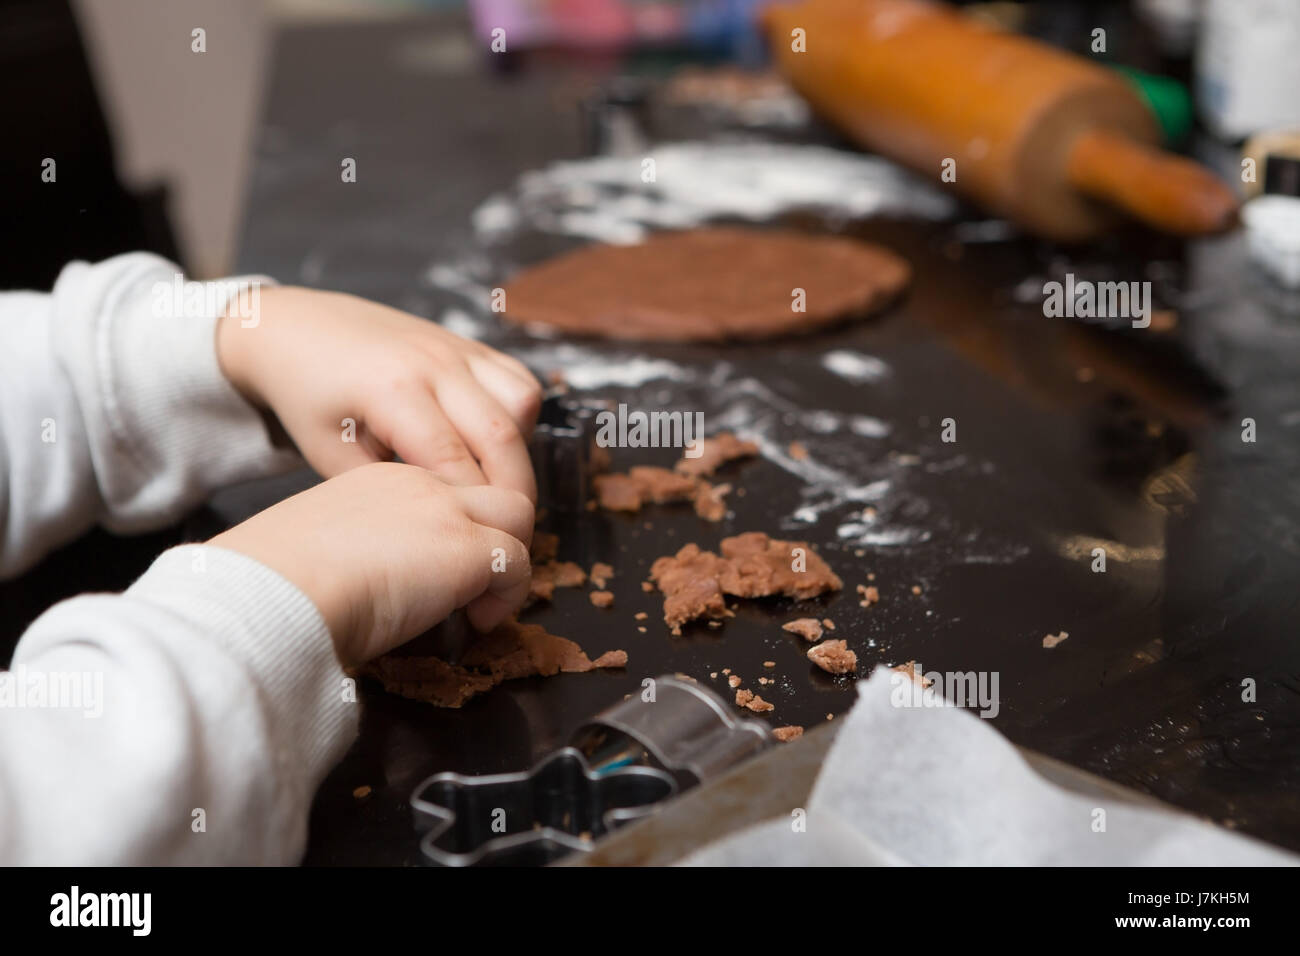 Young Child Learning To Bake Stock Photo